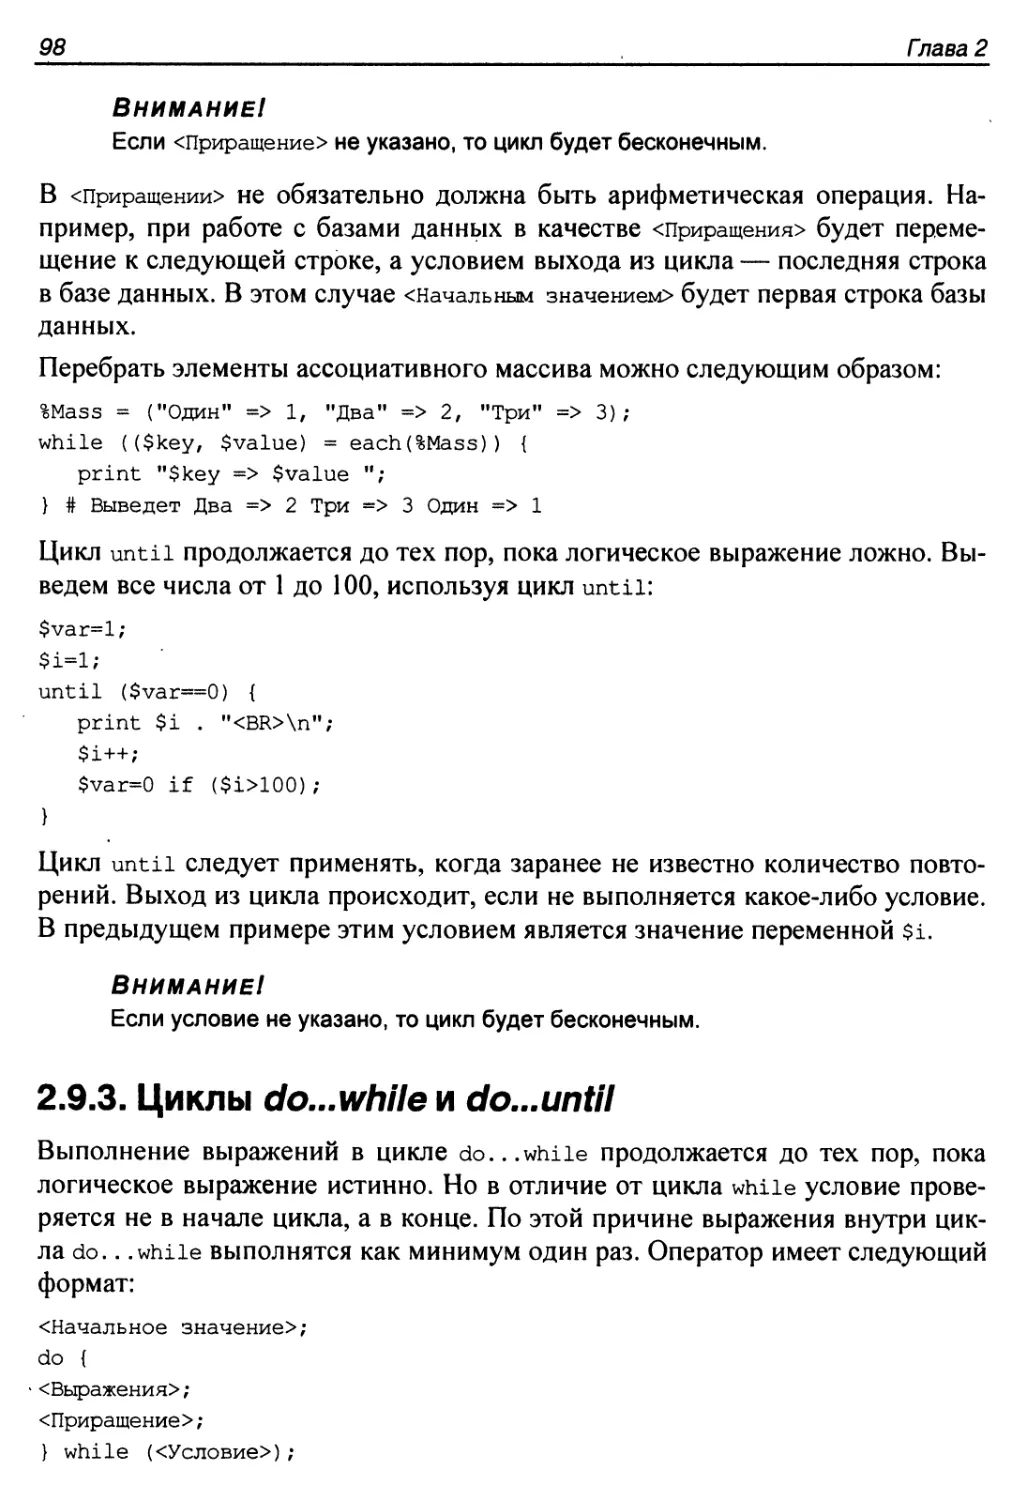 2.9.3. Циклы do while и do until